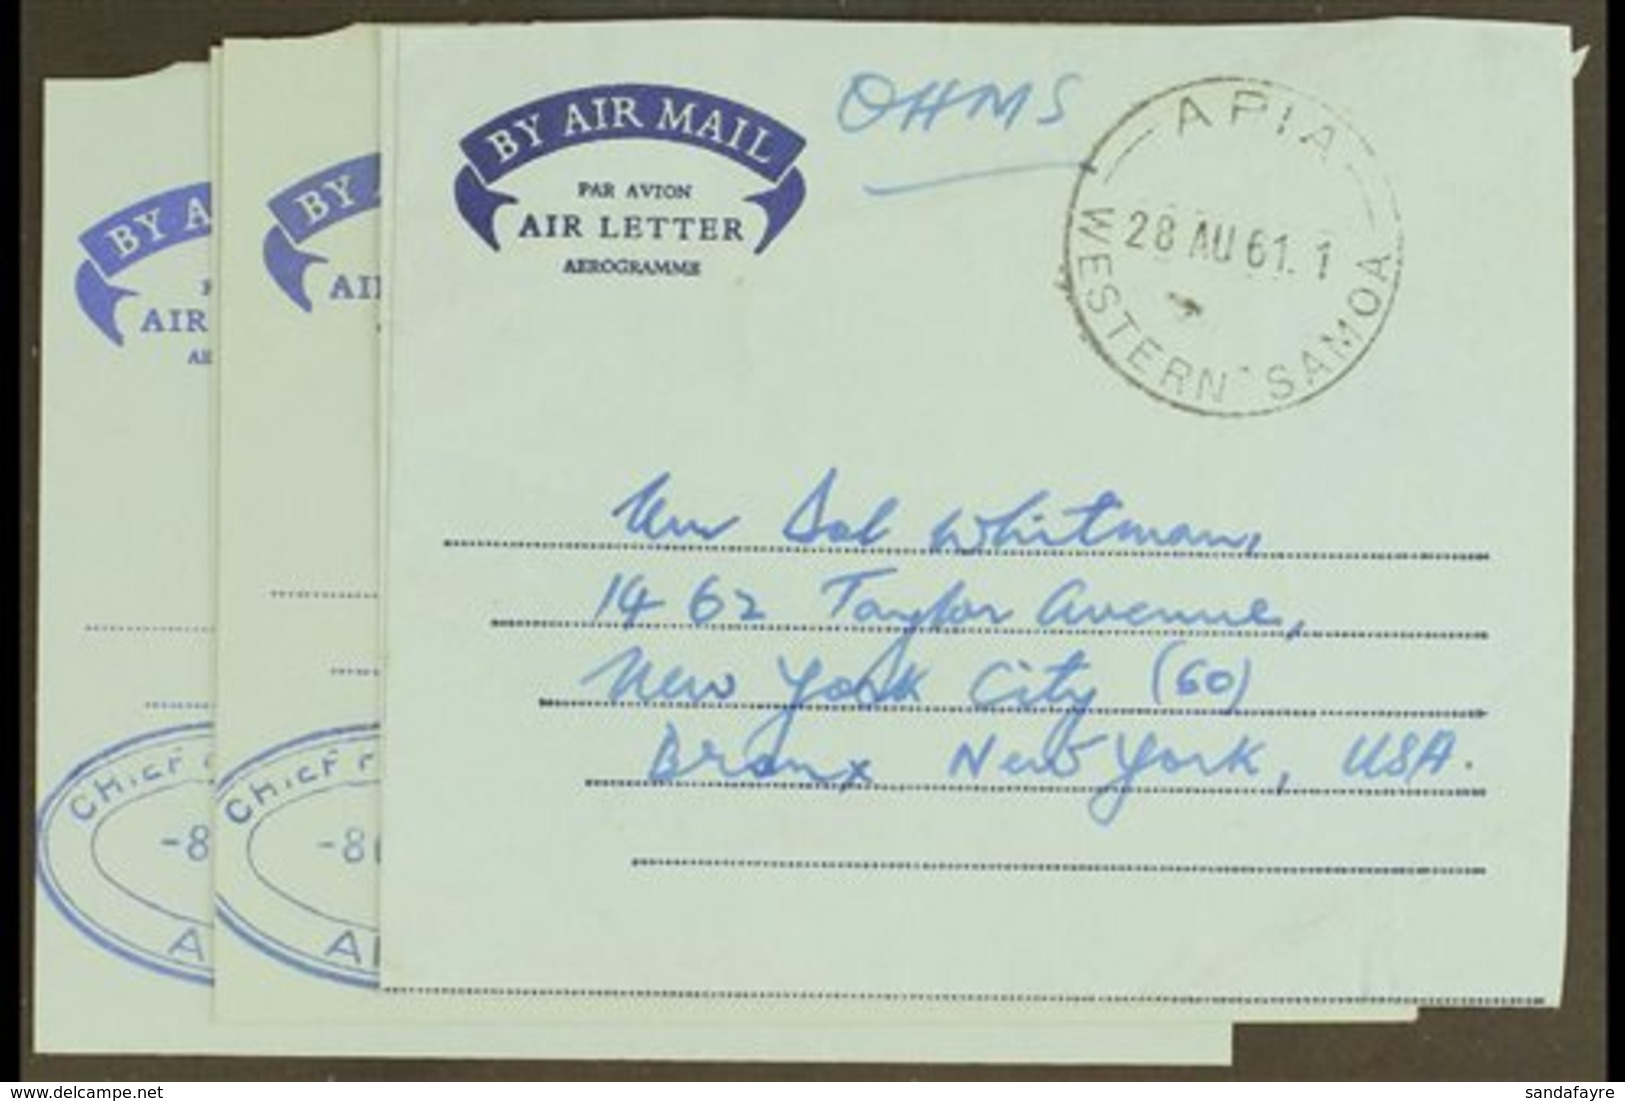 OFFICIAL AEROGRAMMES. 1961-1964 Used Group Of Different Stampless Official Air Letter Sheets Addressed To USA (Kessler 2 - Samoa